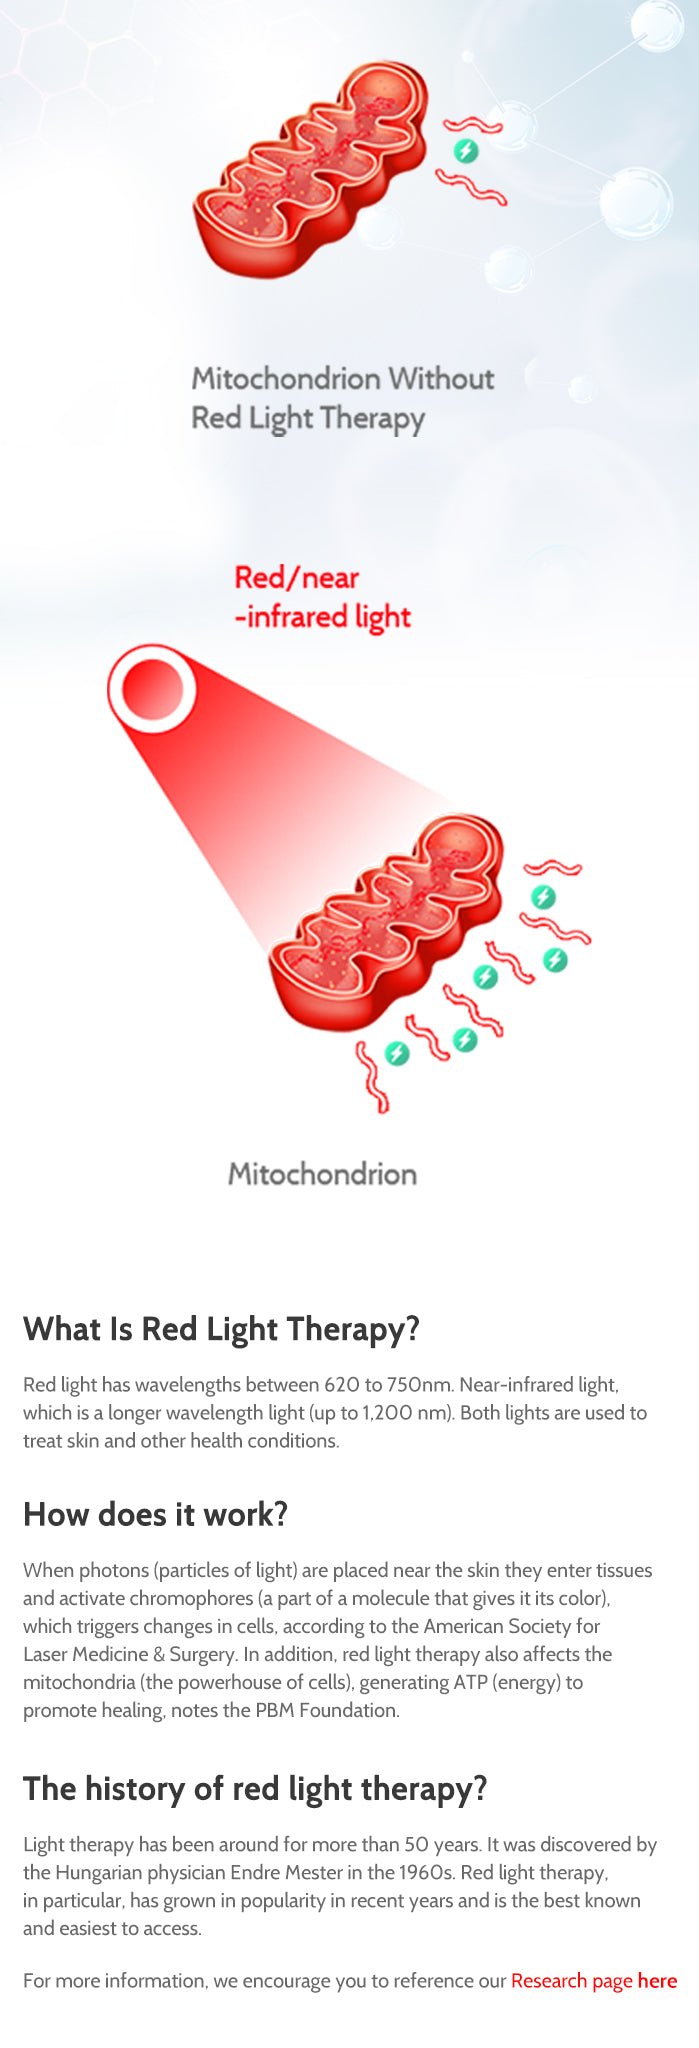 Red Light Therapy Benefits: Conditions It Can Help